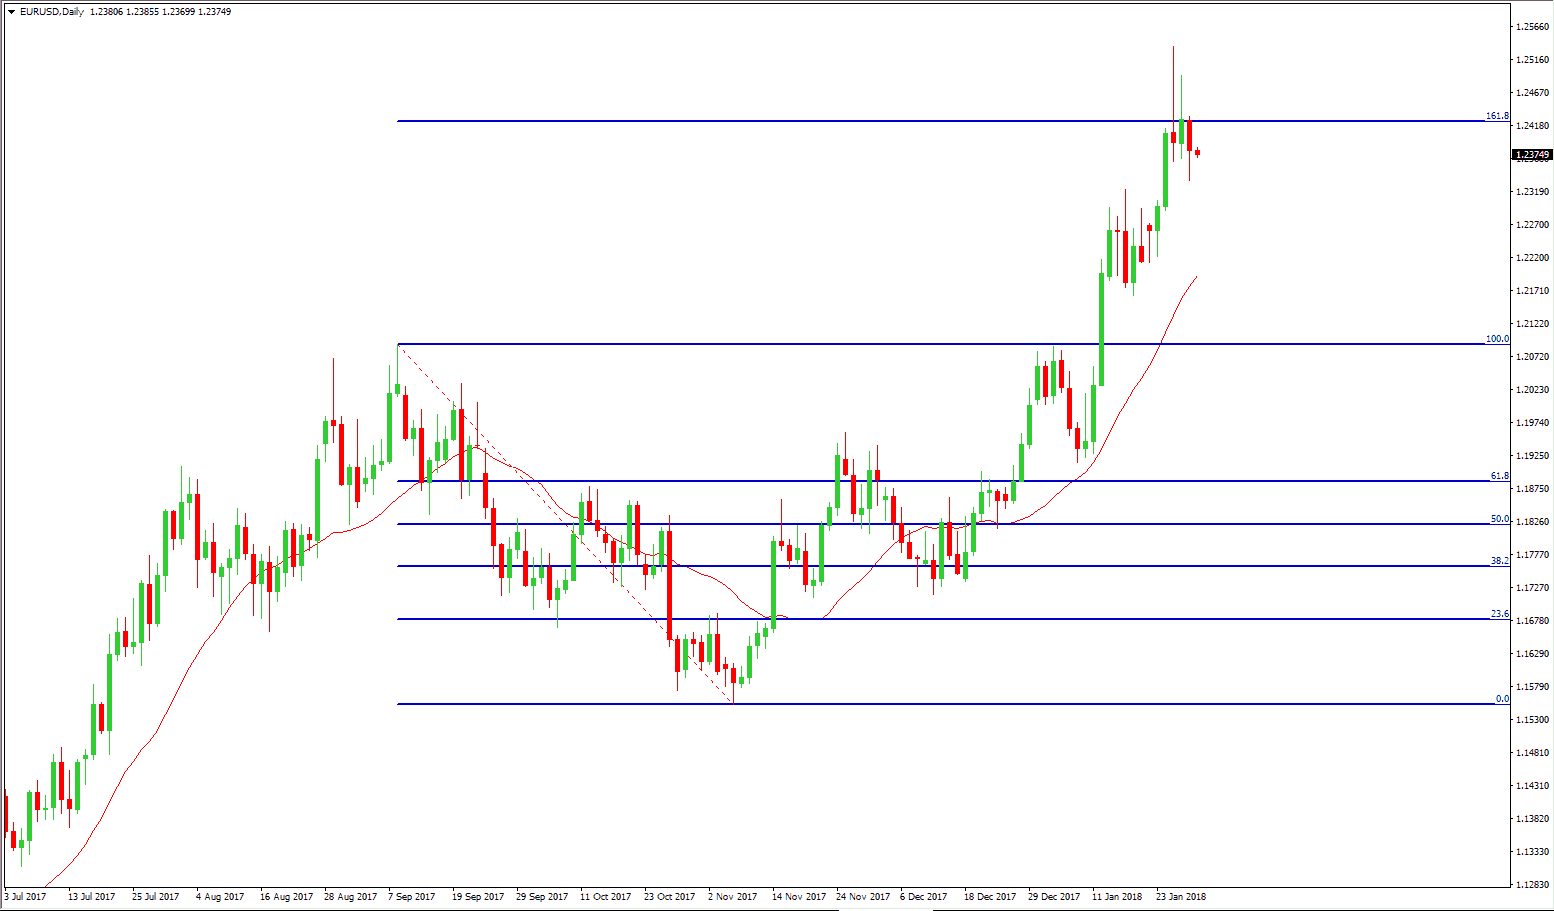 Weekly Technical Perspective on EUR/USD